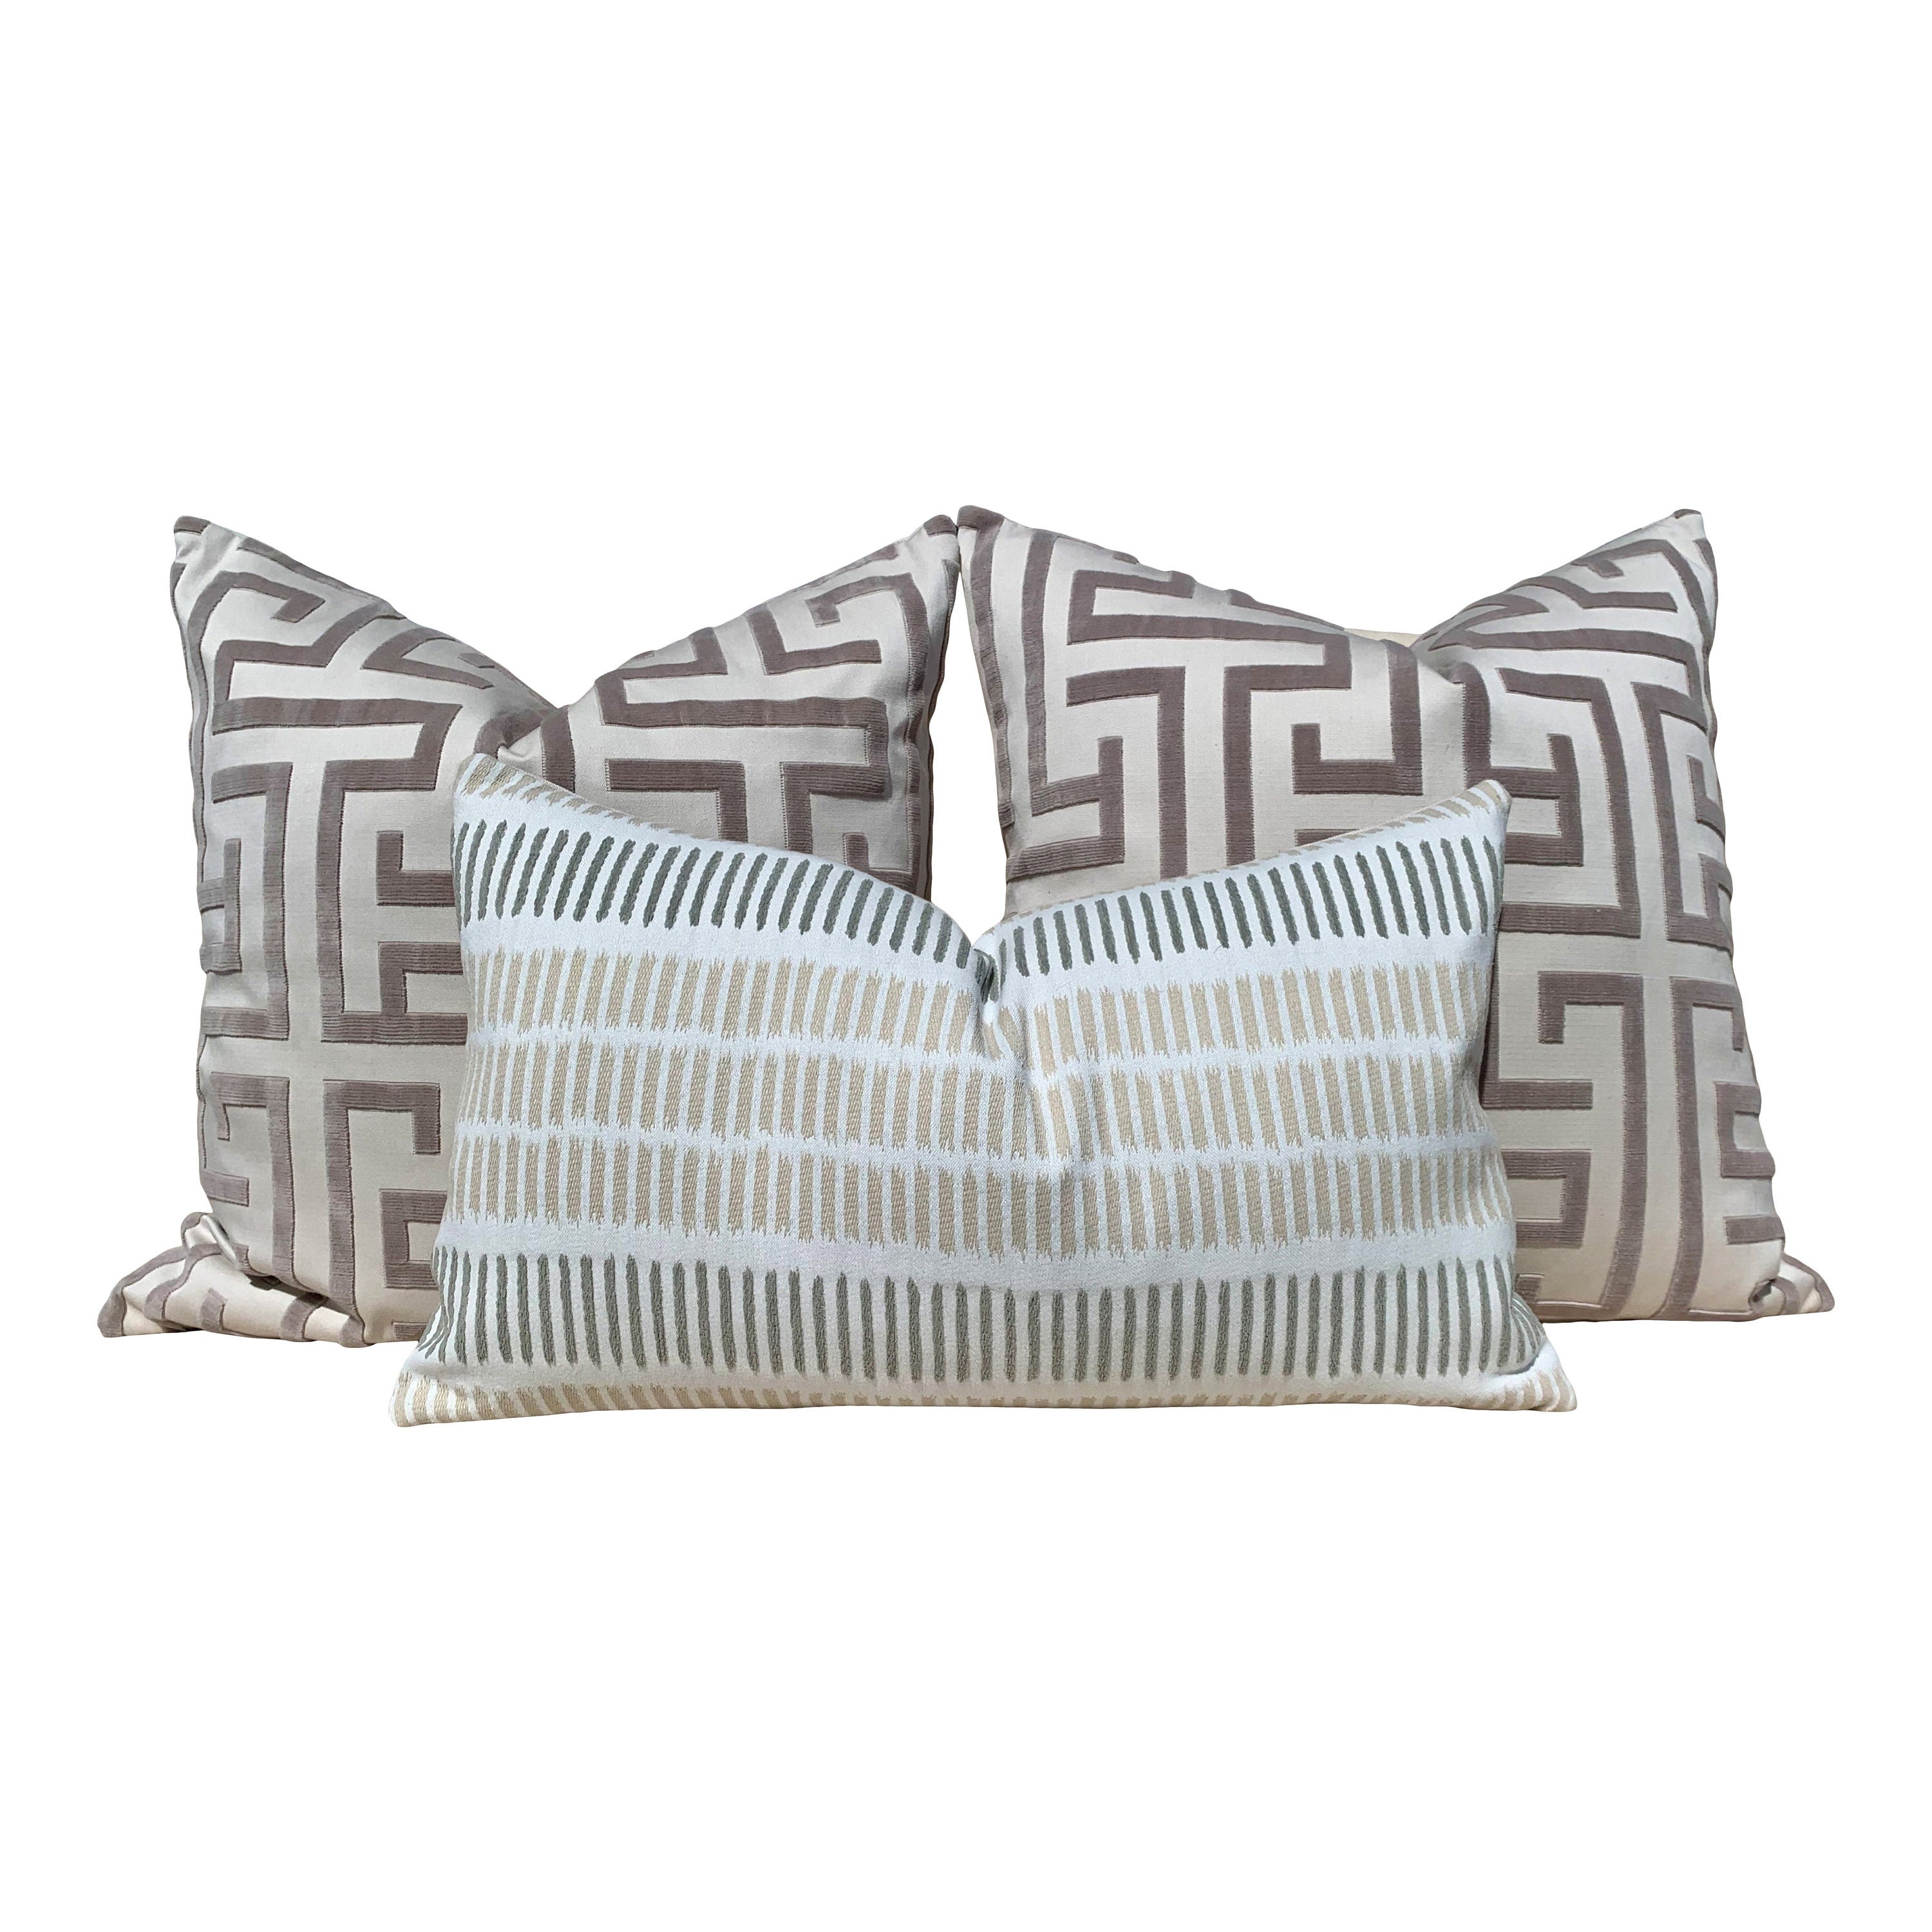 Ming Trail Pillow in Greige. Fretwork Cushion Cover in Gray, Chinoiserie Lumbar Accent Throw Pillow Designer Pillows, Accent Bedding Pillow